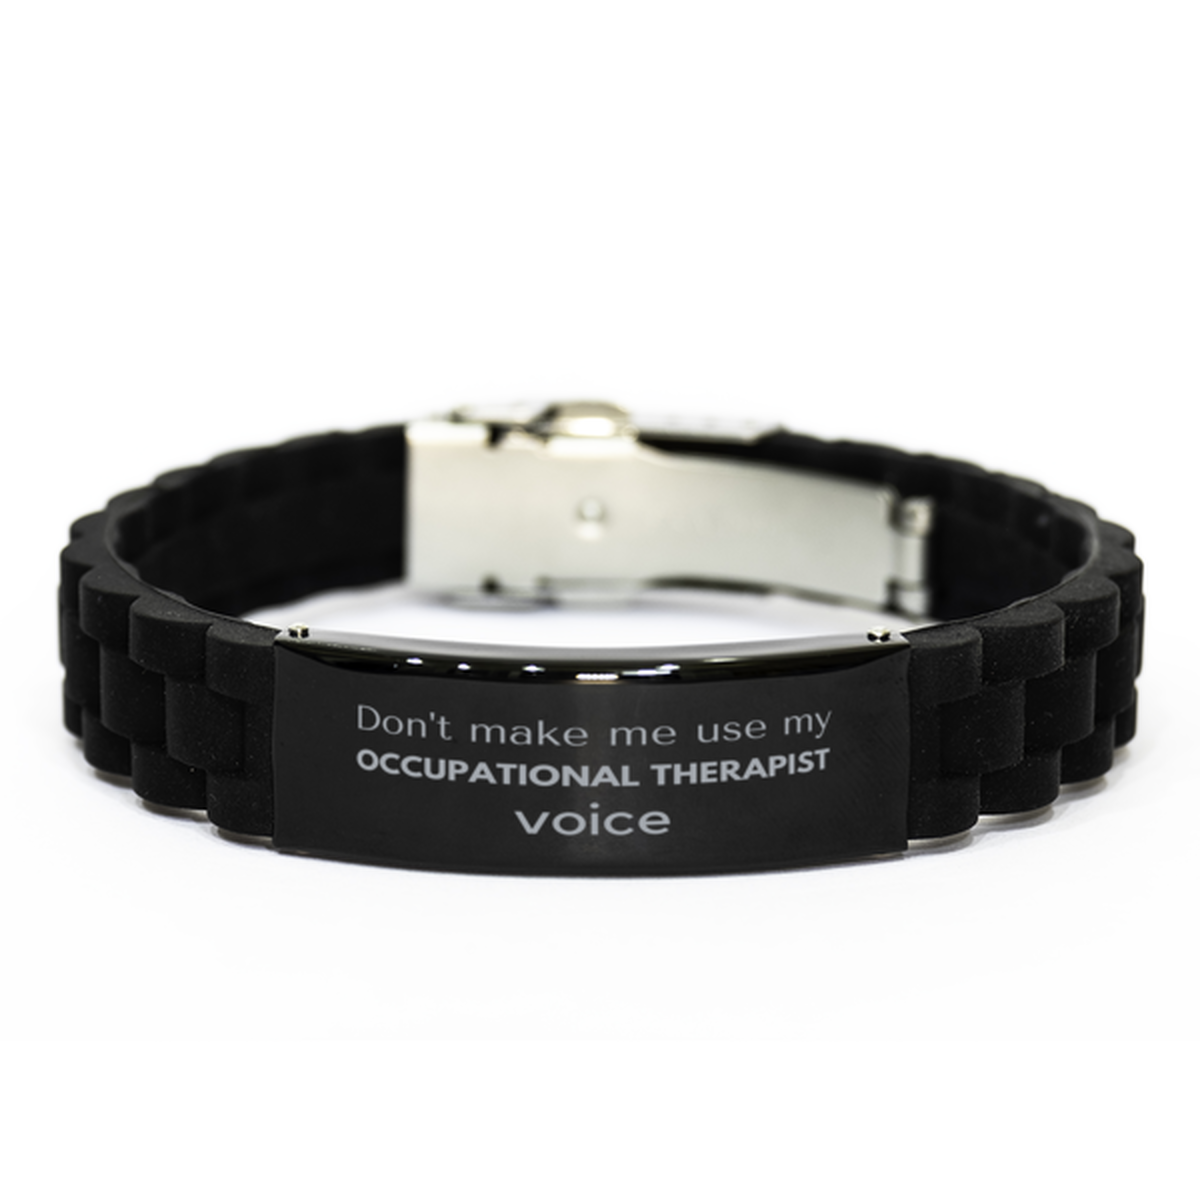 Don't make me use my Occupational Therapist voice, Sarcasm Occupational Therapist Gifts, Christmas Occupational Therapist Black Glidelock Clasp Bracelet Birthday Unique Gifts For Occupational Therapist Coworkers, Men, Women, Colleague, Friends